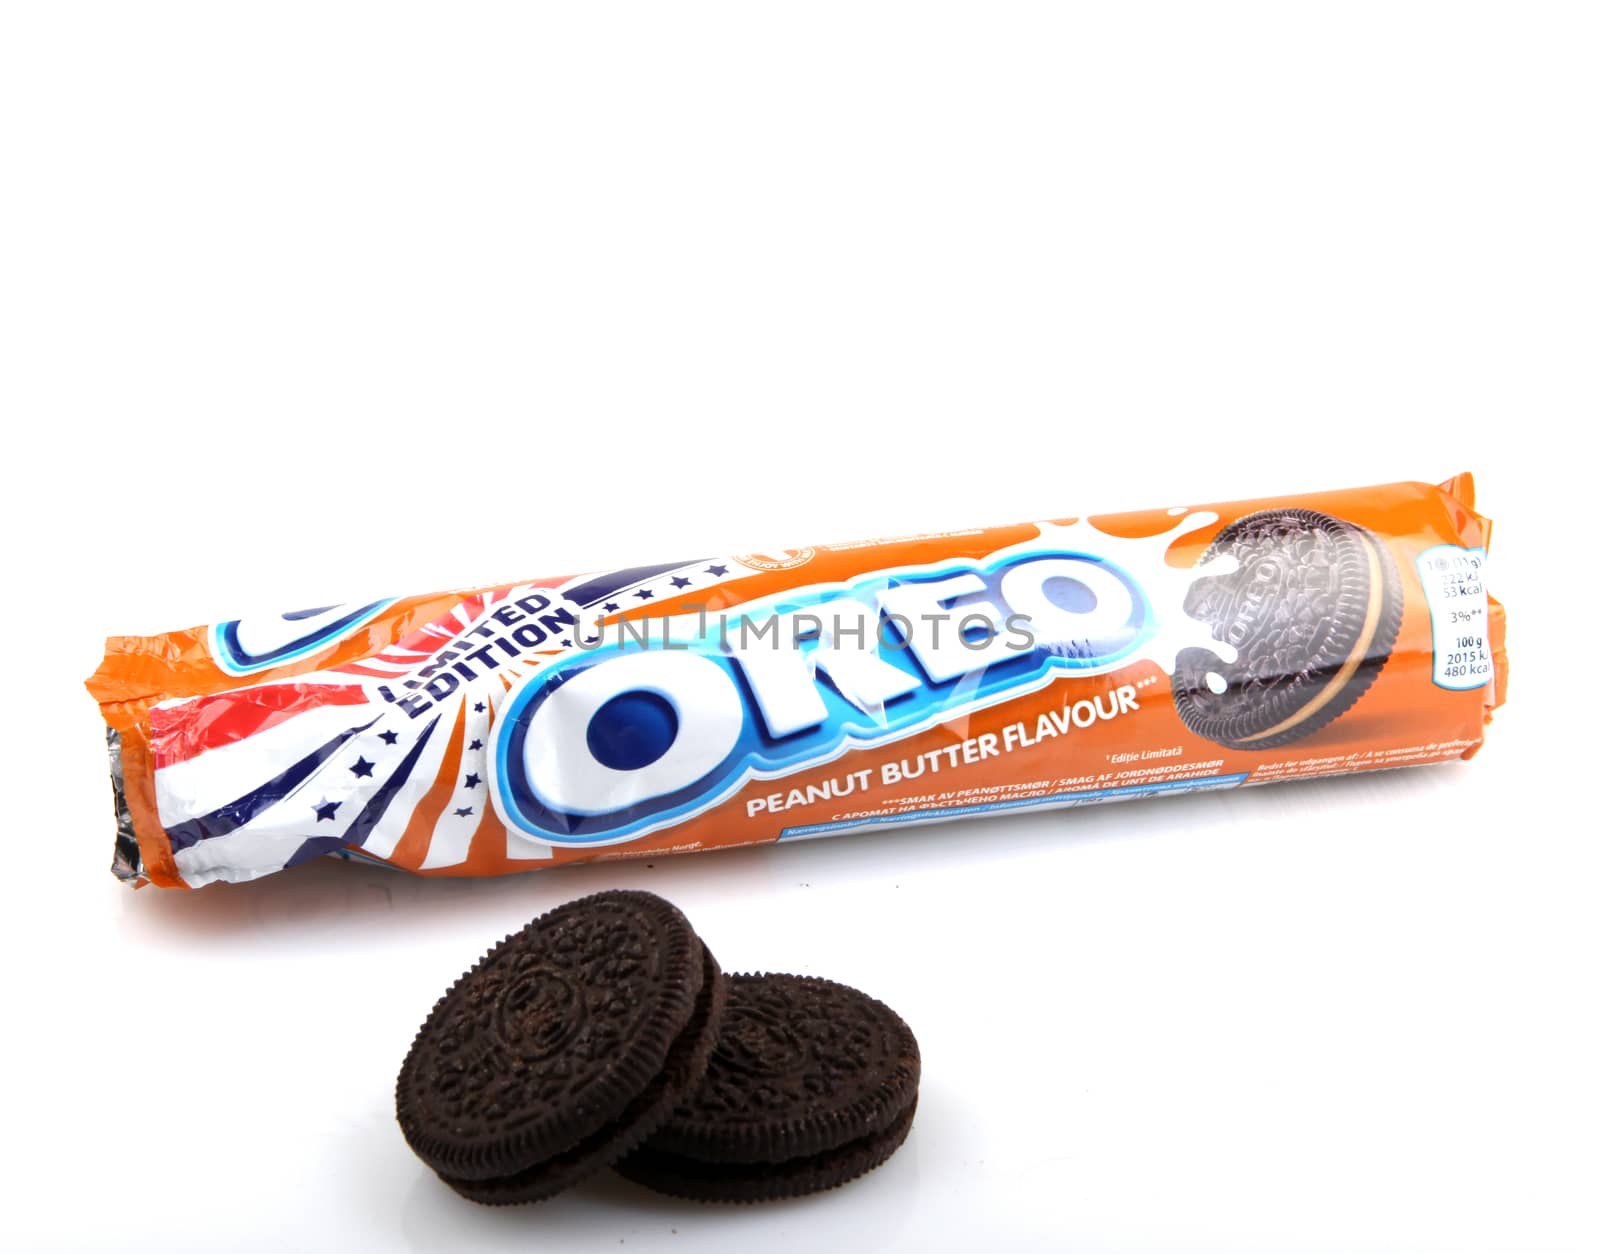 AYTOS, BULGARIA - APRIL 03, 2016: Oreo isolated on white background. Oreo is a sandwich cookie consisting of two chocolate disks with a sweet cream filling in between.